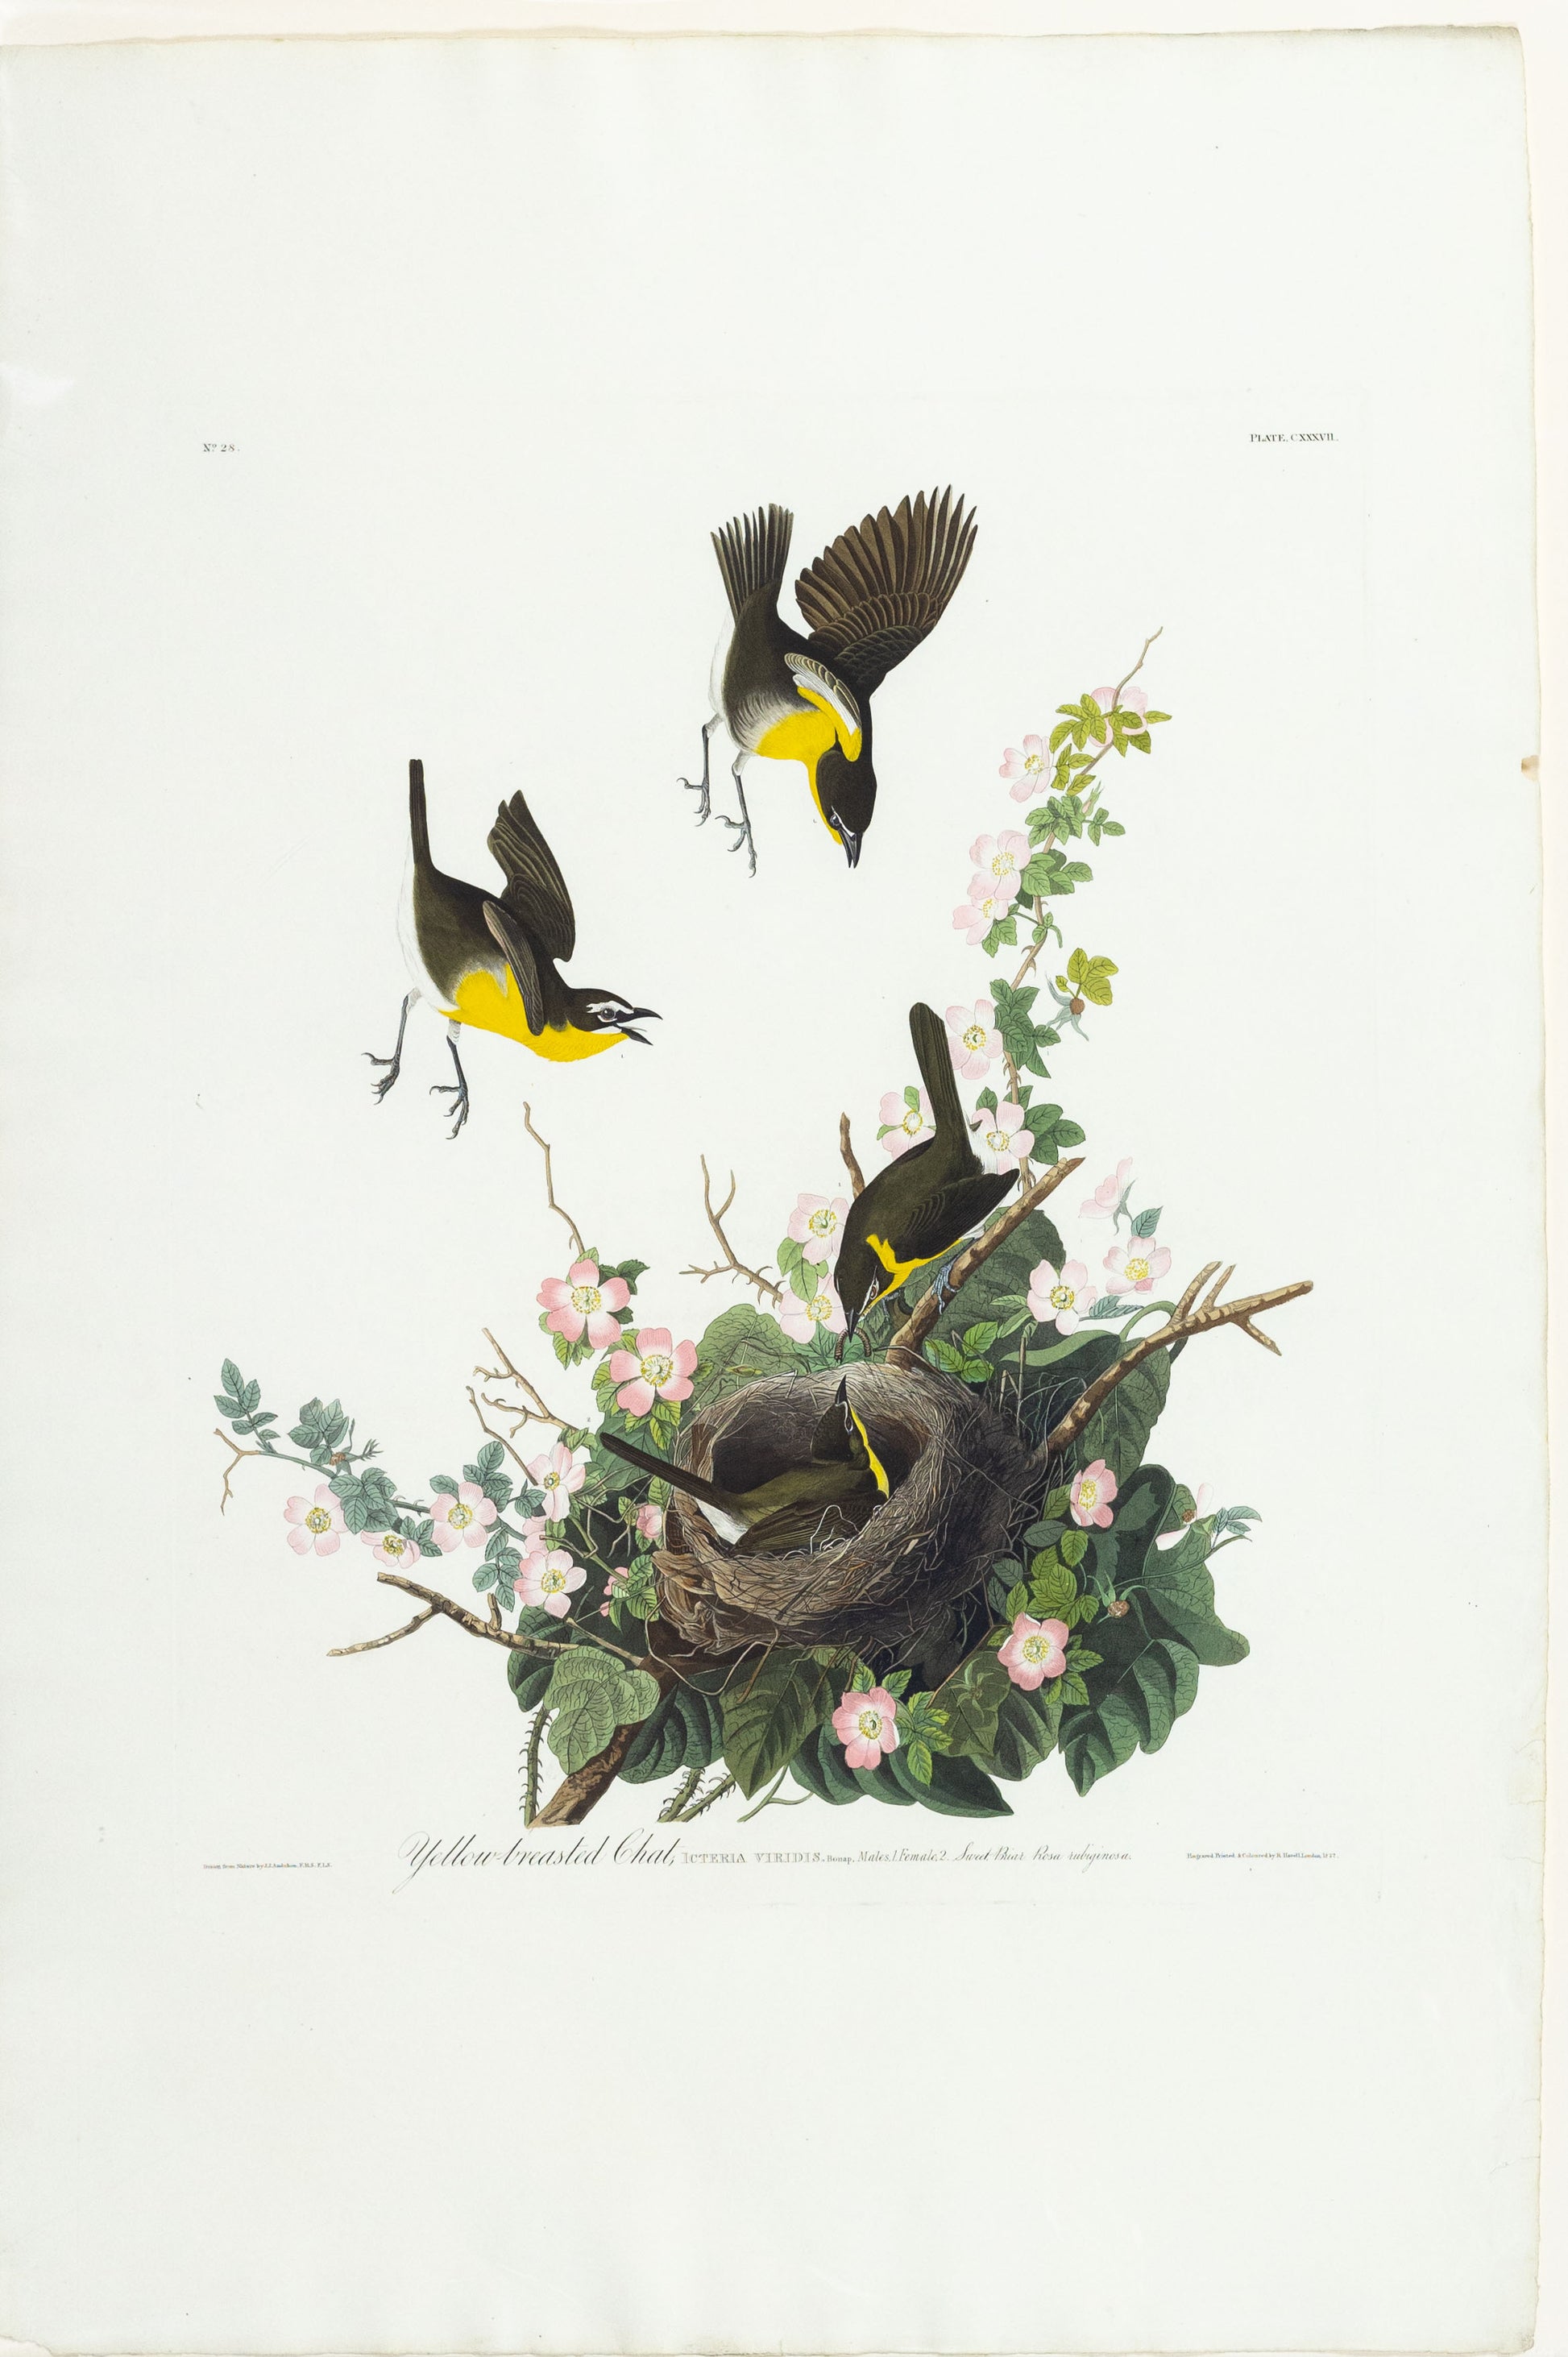 John James Audubon (1785-1851)  Plate CXXXVII Yellow-breasted Chat  from Birds of America  Engraved by Robert Havell (1793-1878)  Published: London, 1827-1838  Aquatint engraving with original hand coloring  Paper size: 38 1/2 x 25 1/2" 